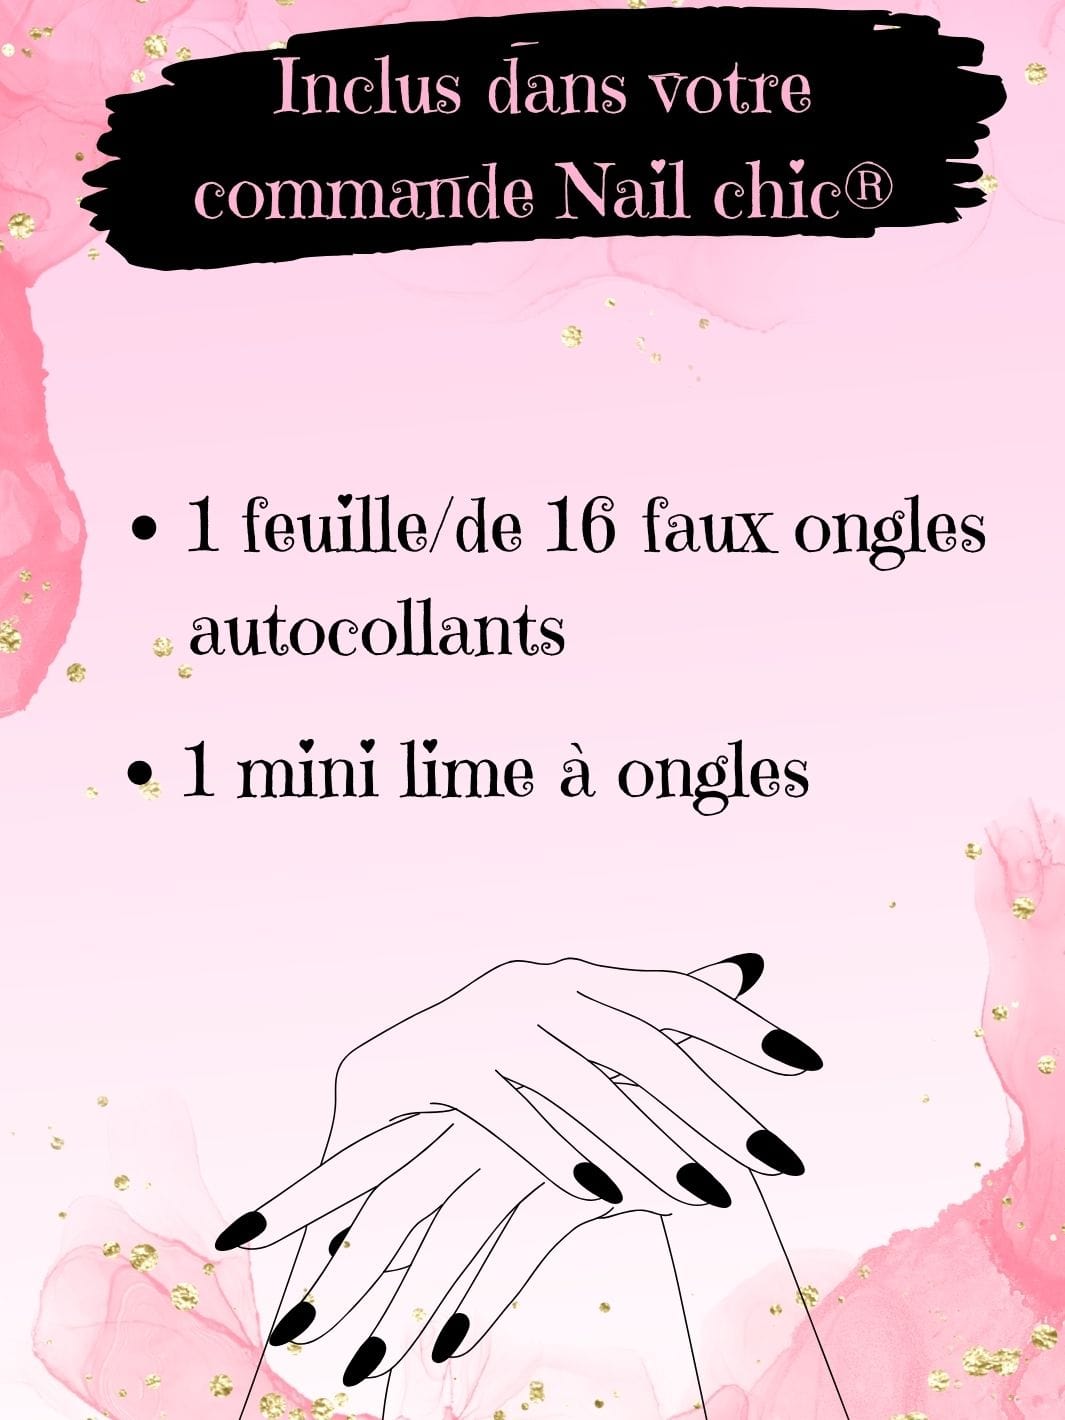 Faux ongles autocollant Nail Chic